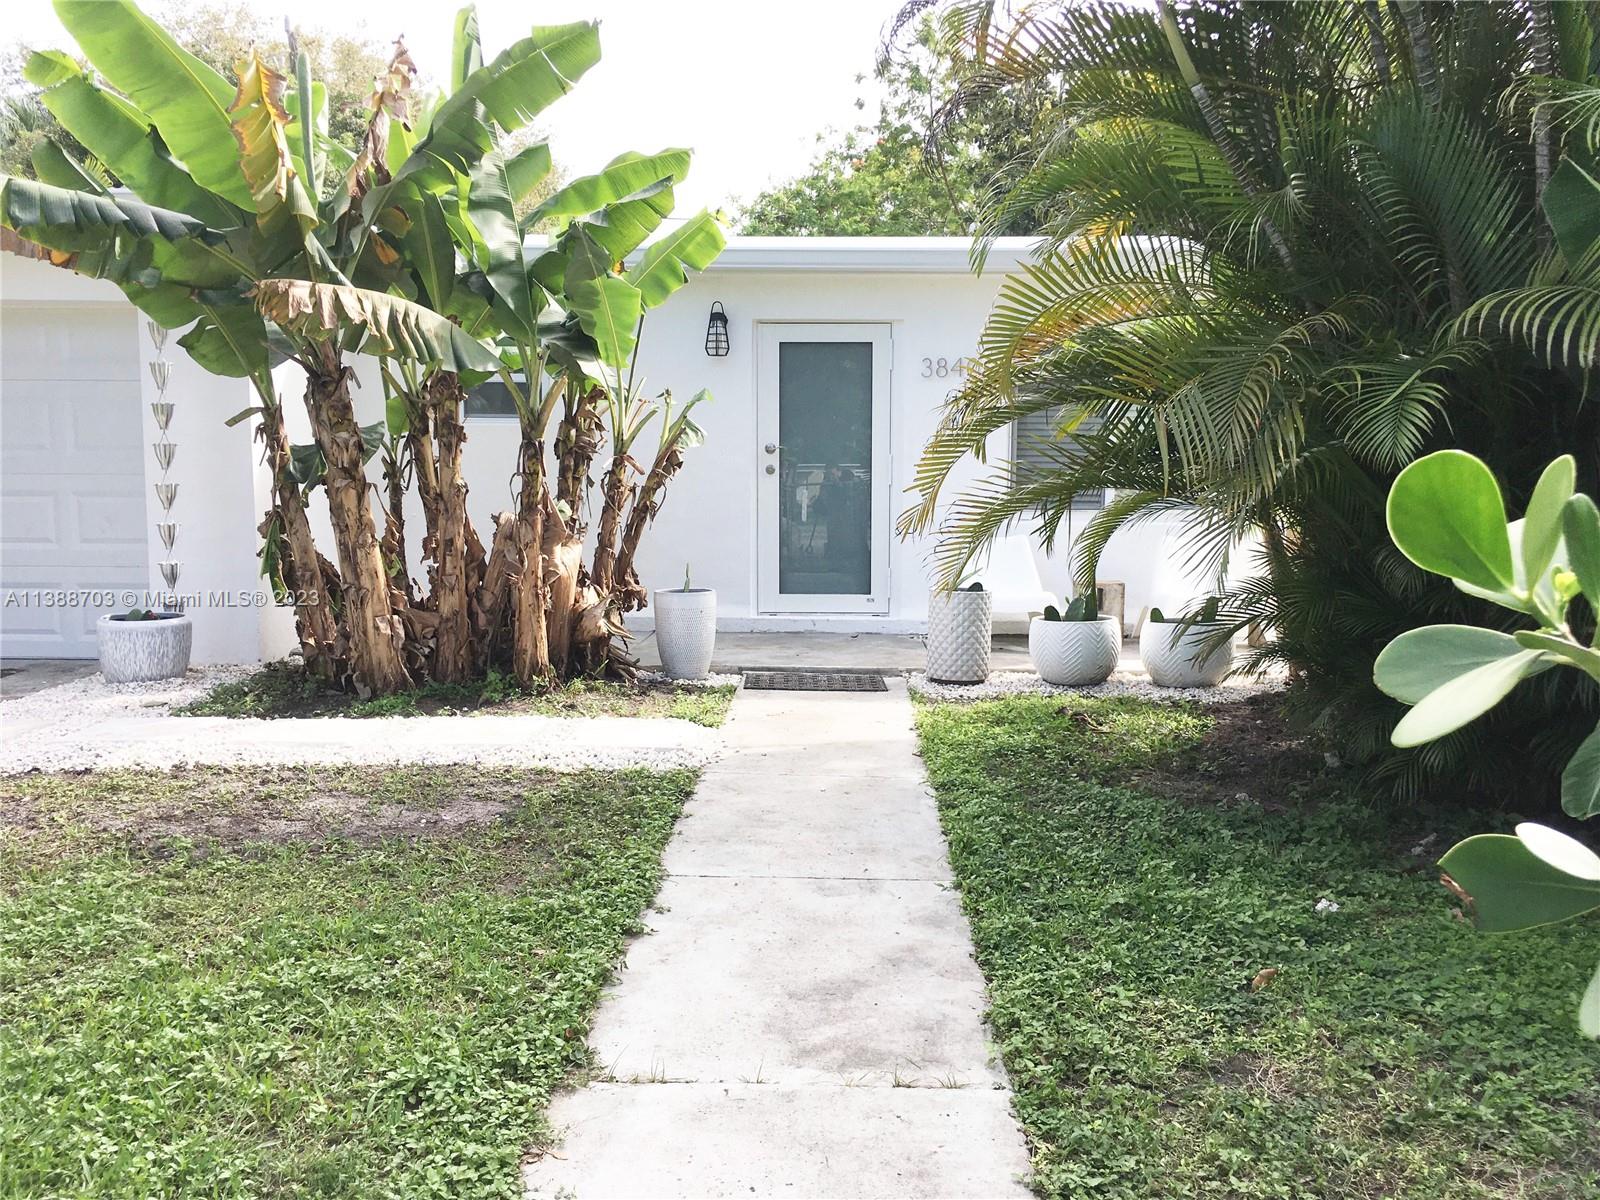 Are you looking for a completely renovated home under $1M in Coconut Grove for yourself or as a highly profitable investment property? Move right in to this four bedroom, four bath home on a 6,000 SF lot or earn great income with potential to build a multi-million dollar home now or in the future. Located just a mile from all the top shops, restaurants, entertainment, and waterfront parks in Coconut Grove’s village center, within walking distance to two top public schools, less than a mile to the Metrorail (one stop to UM), and just 5 miles from Brickell/Downtown Miami.